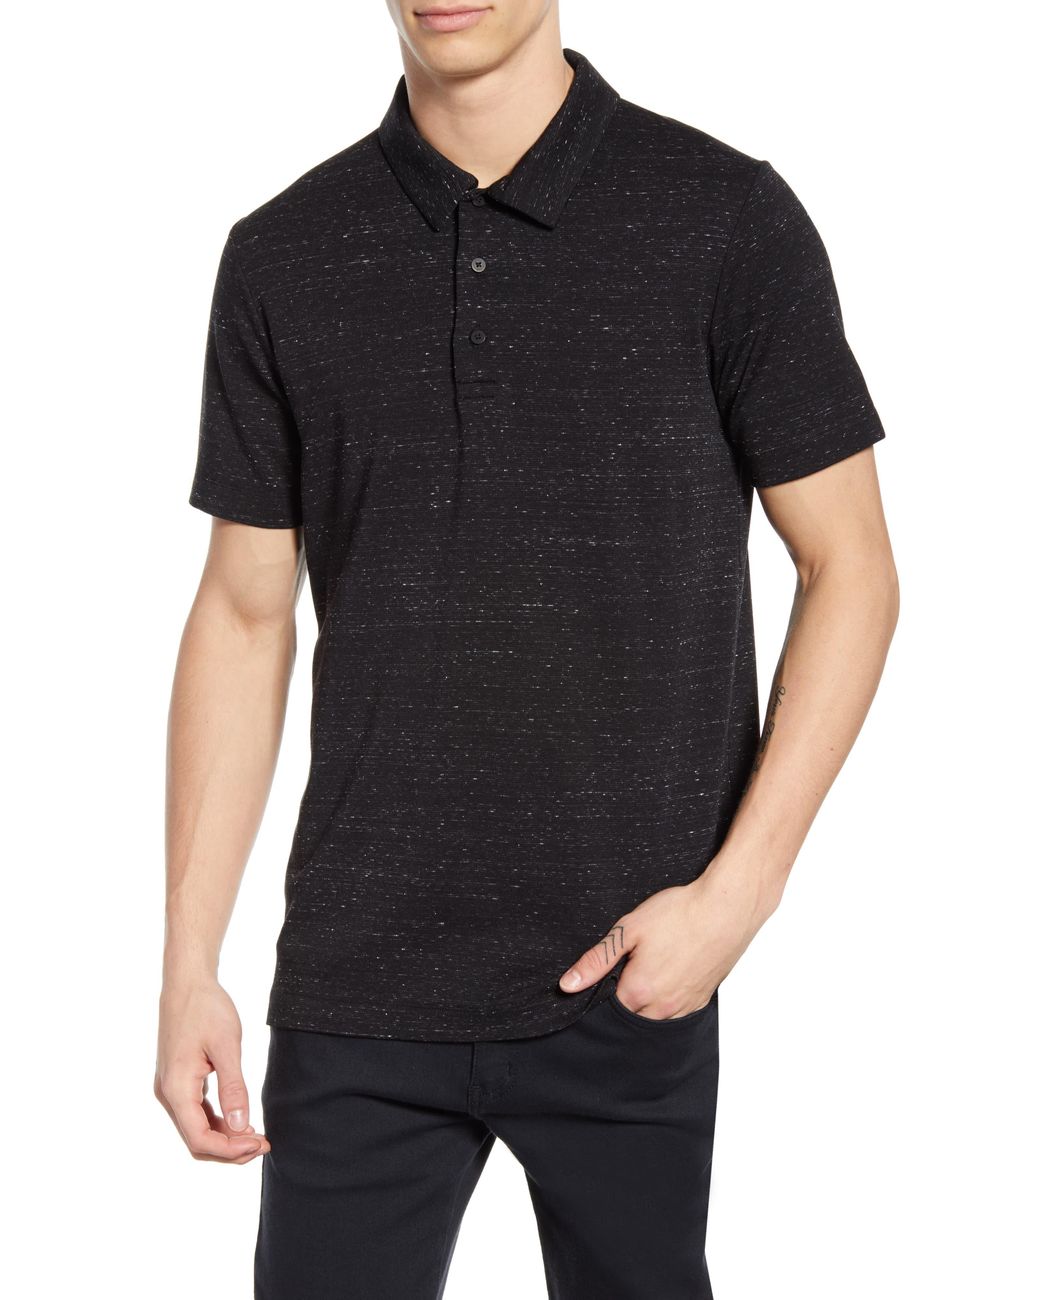 Wings + Horns Signals Neppy Polo in Black for Men - Lyst